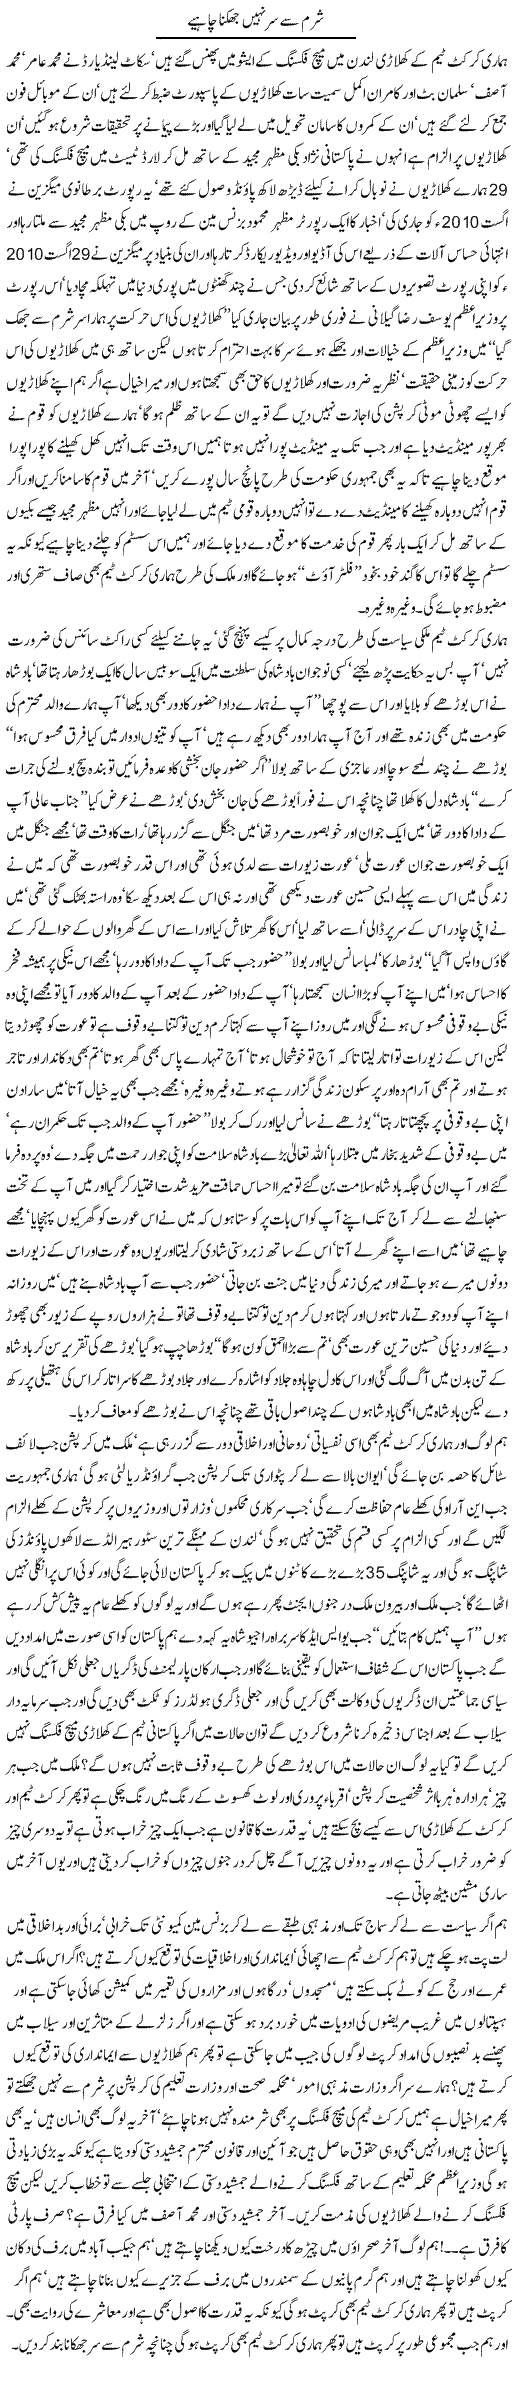 Head Down With Shame Express Column Javed Chaudhry 31 August 2010